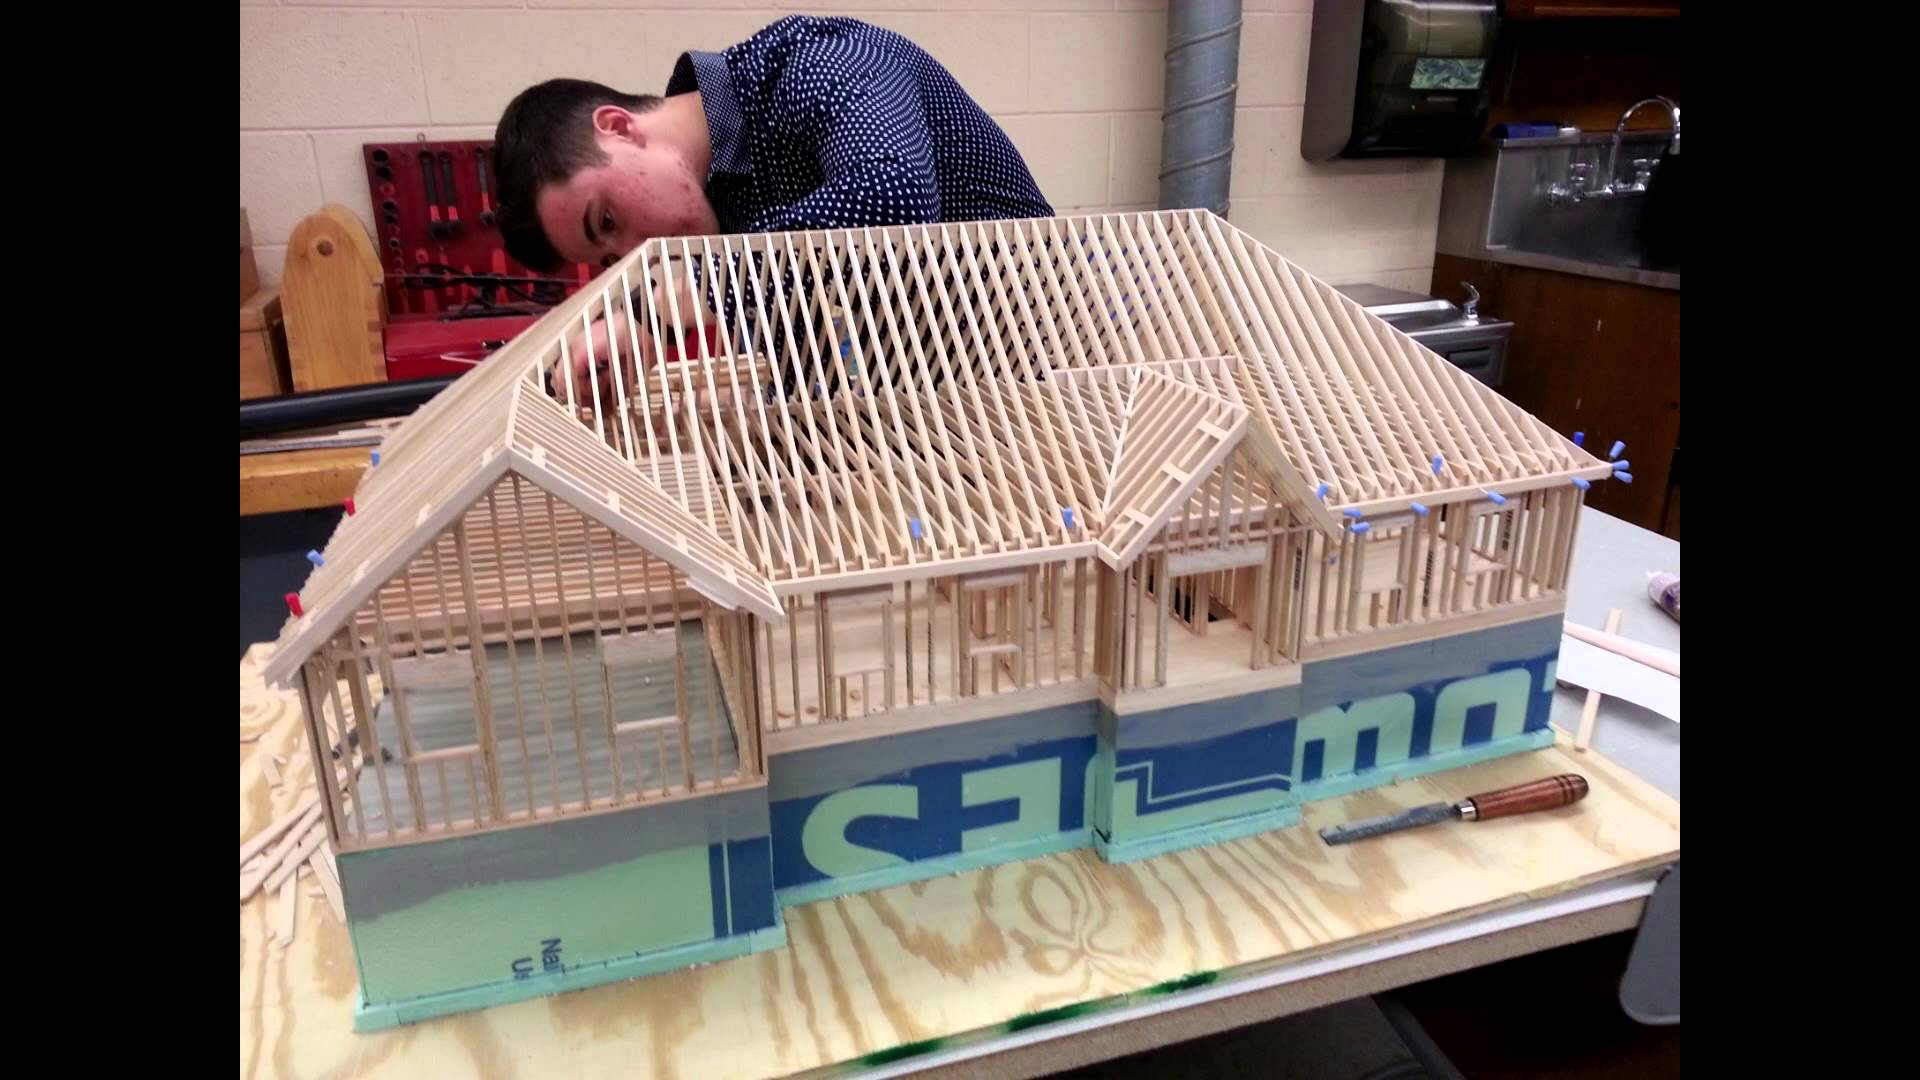 Building The 1/24 Scale Architectural Model - YouTube